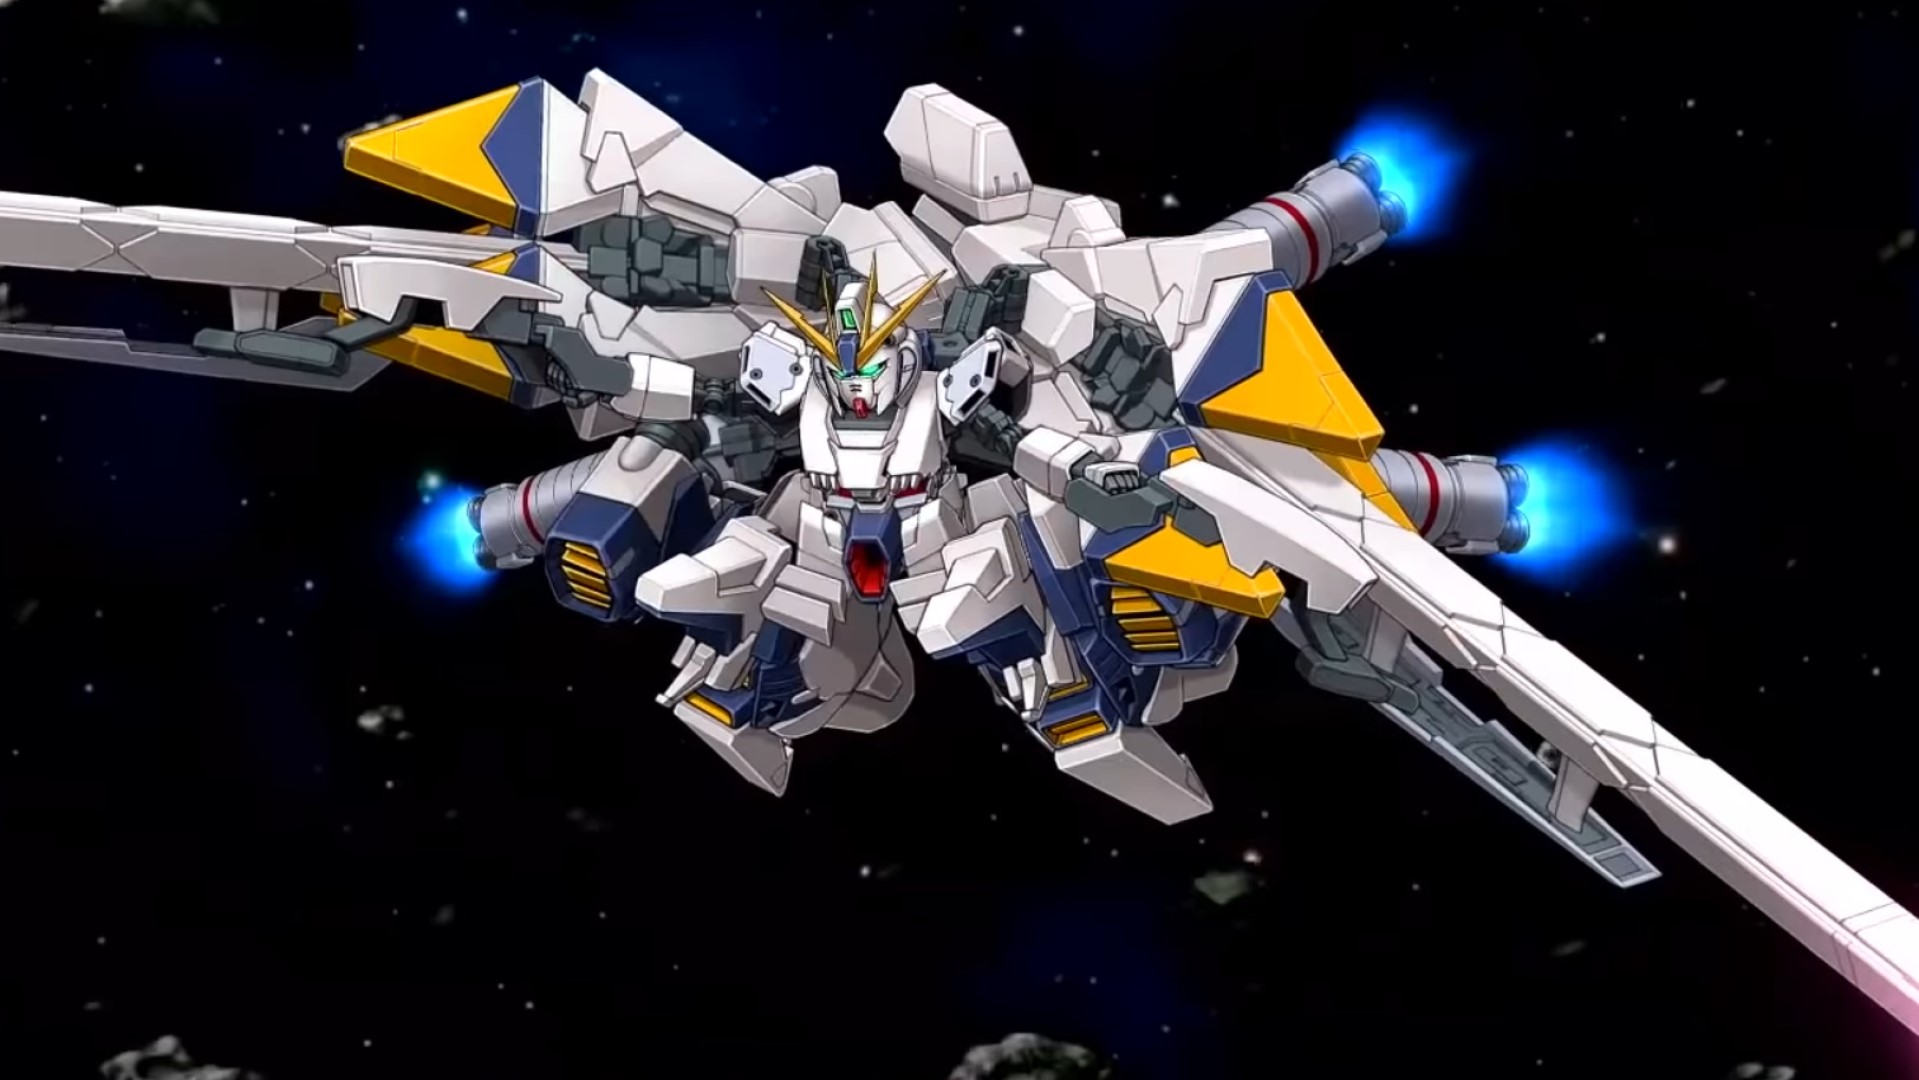 Longrunning anime strategy game Super Robot Wars finally gets a Steam